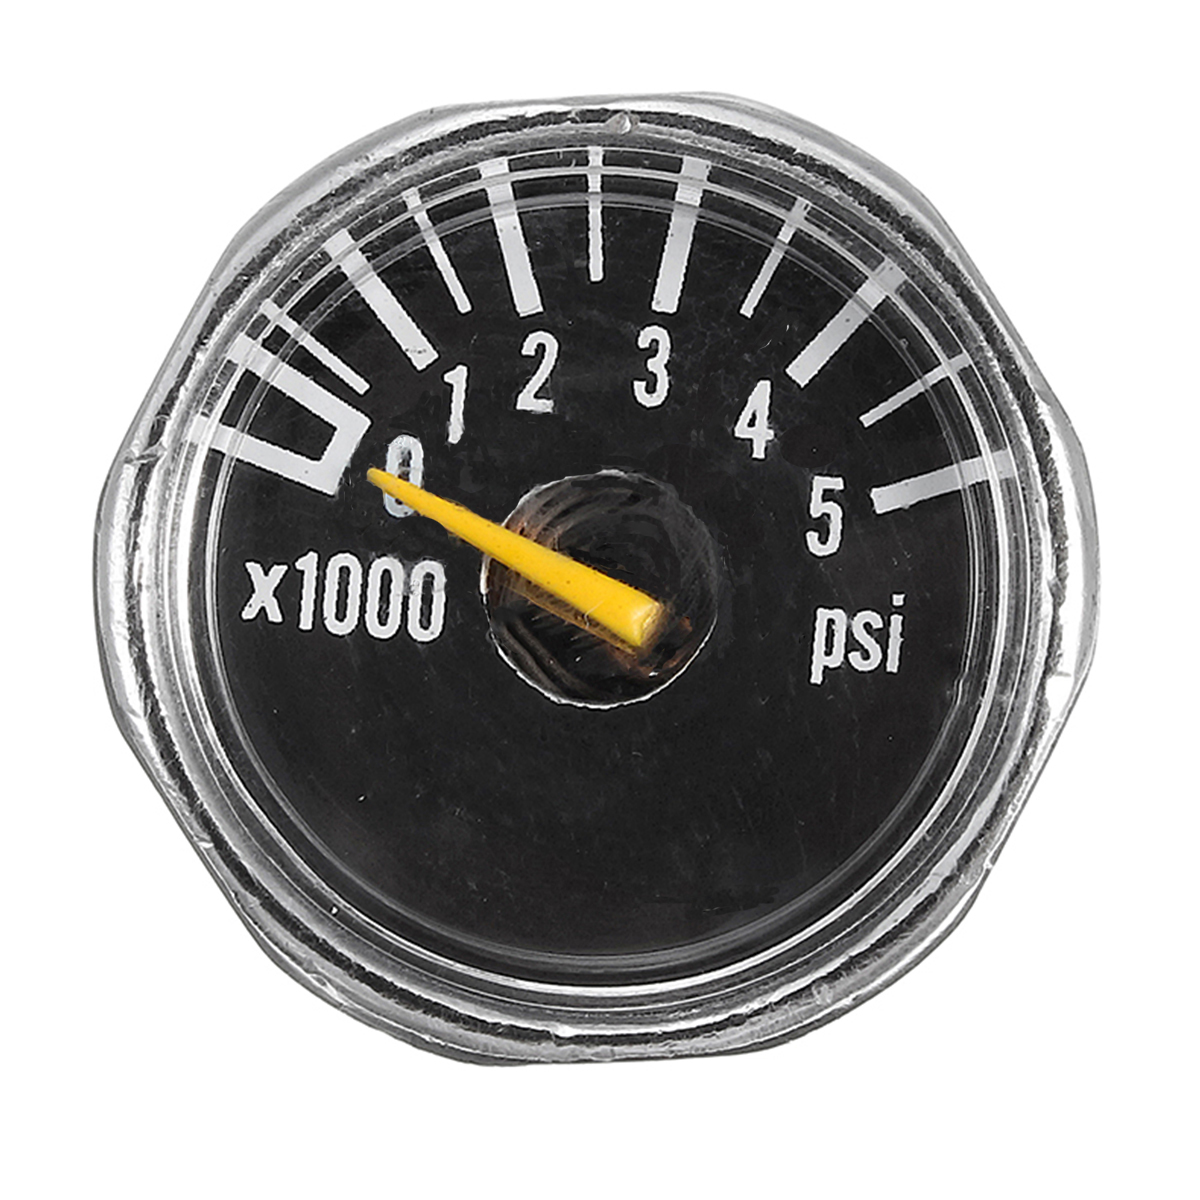 Micro-Gauge-1-inch-25mm-0-to-5000psi-High-Pressure-for-HPA-Paintball-Tank-CO2-PCP-1263873-2